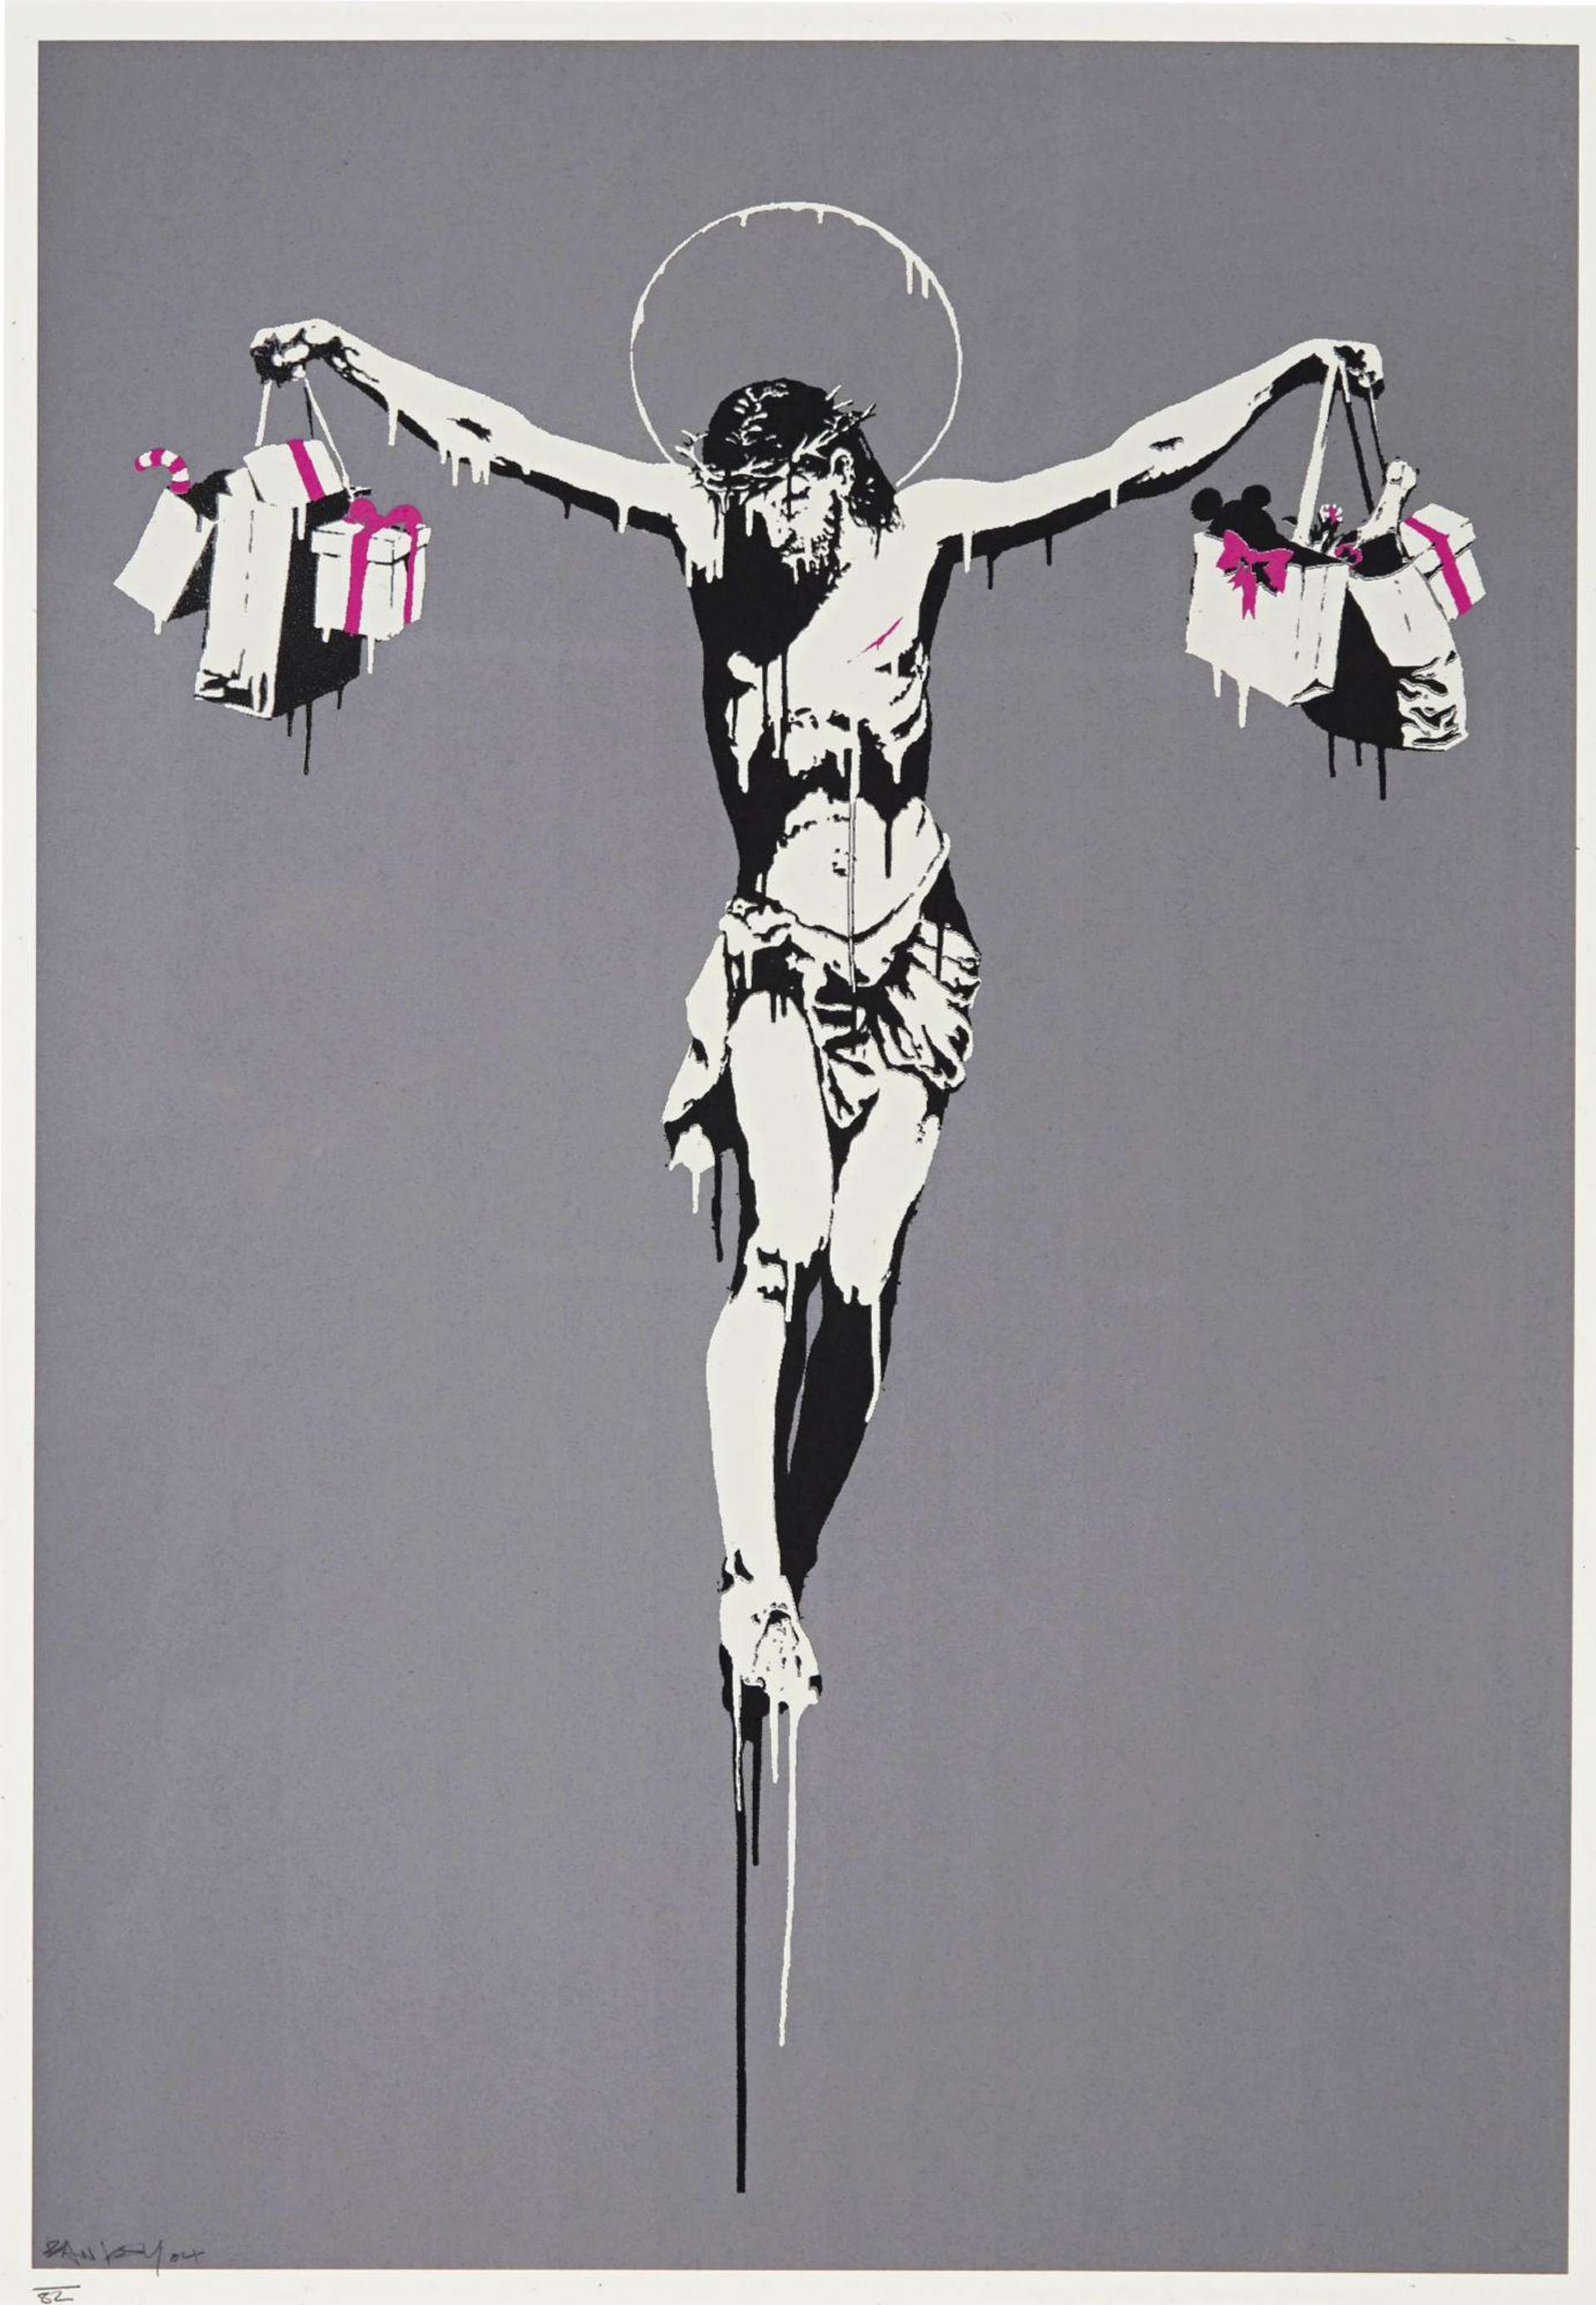 Christ With Shopping Bags by Banksy - MyArtBroker